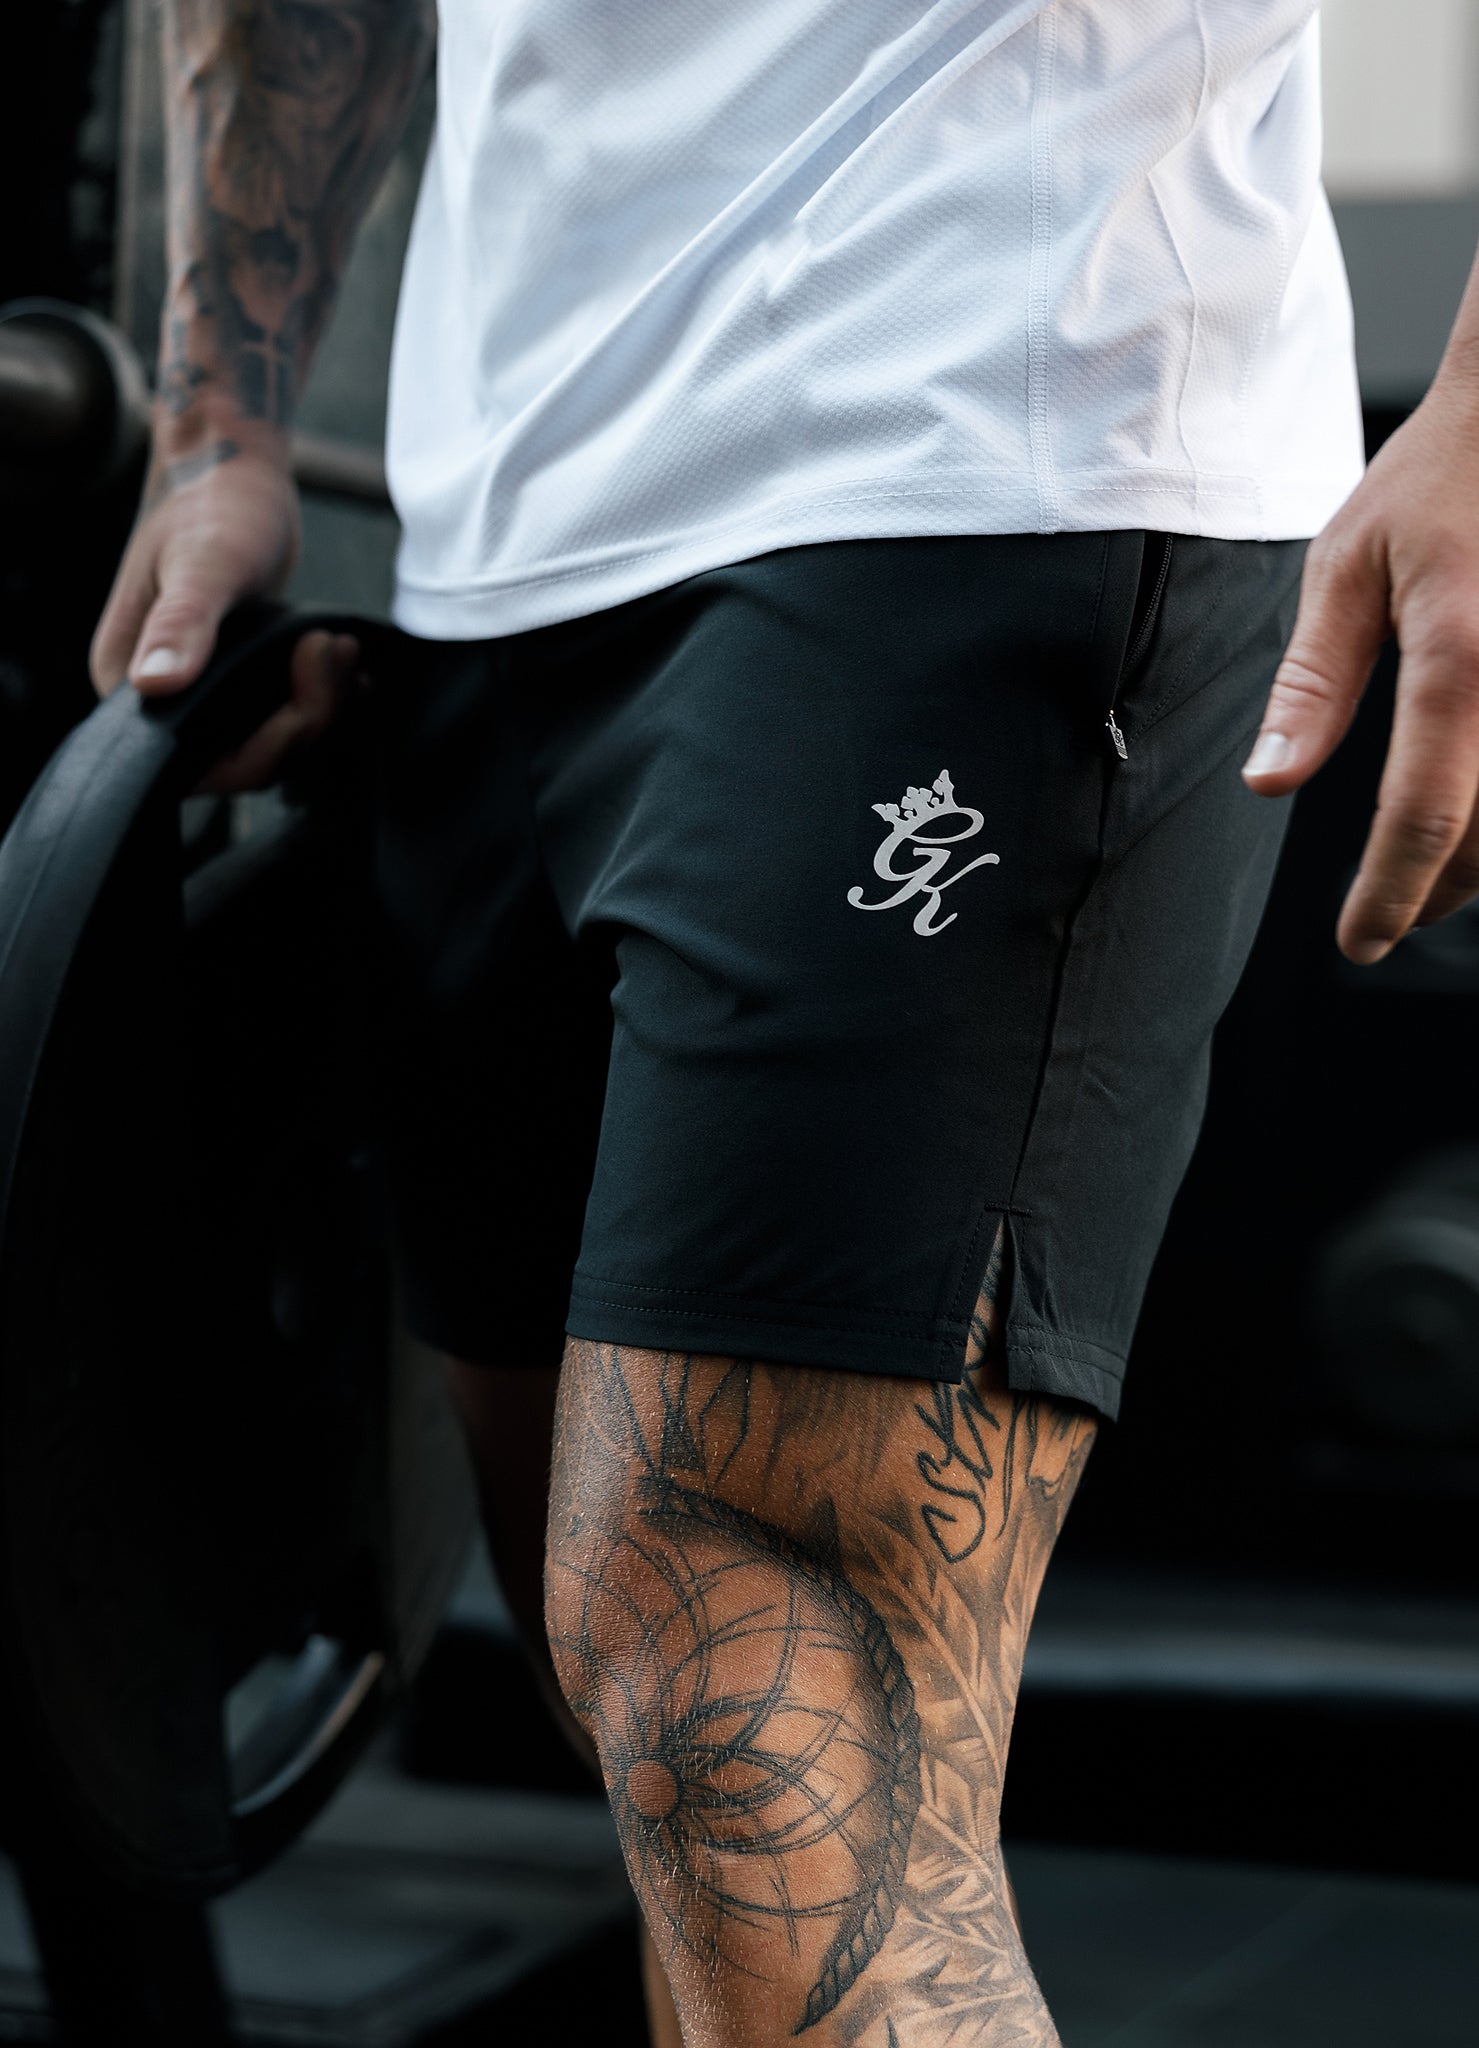 Nylon Gym Shorts With Compression Liners - King Killers